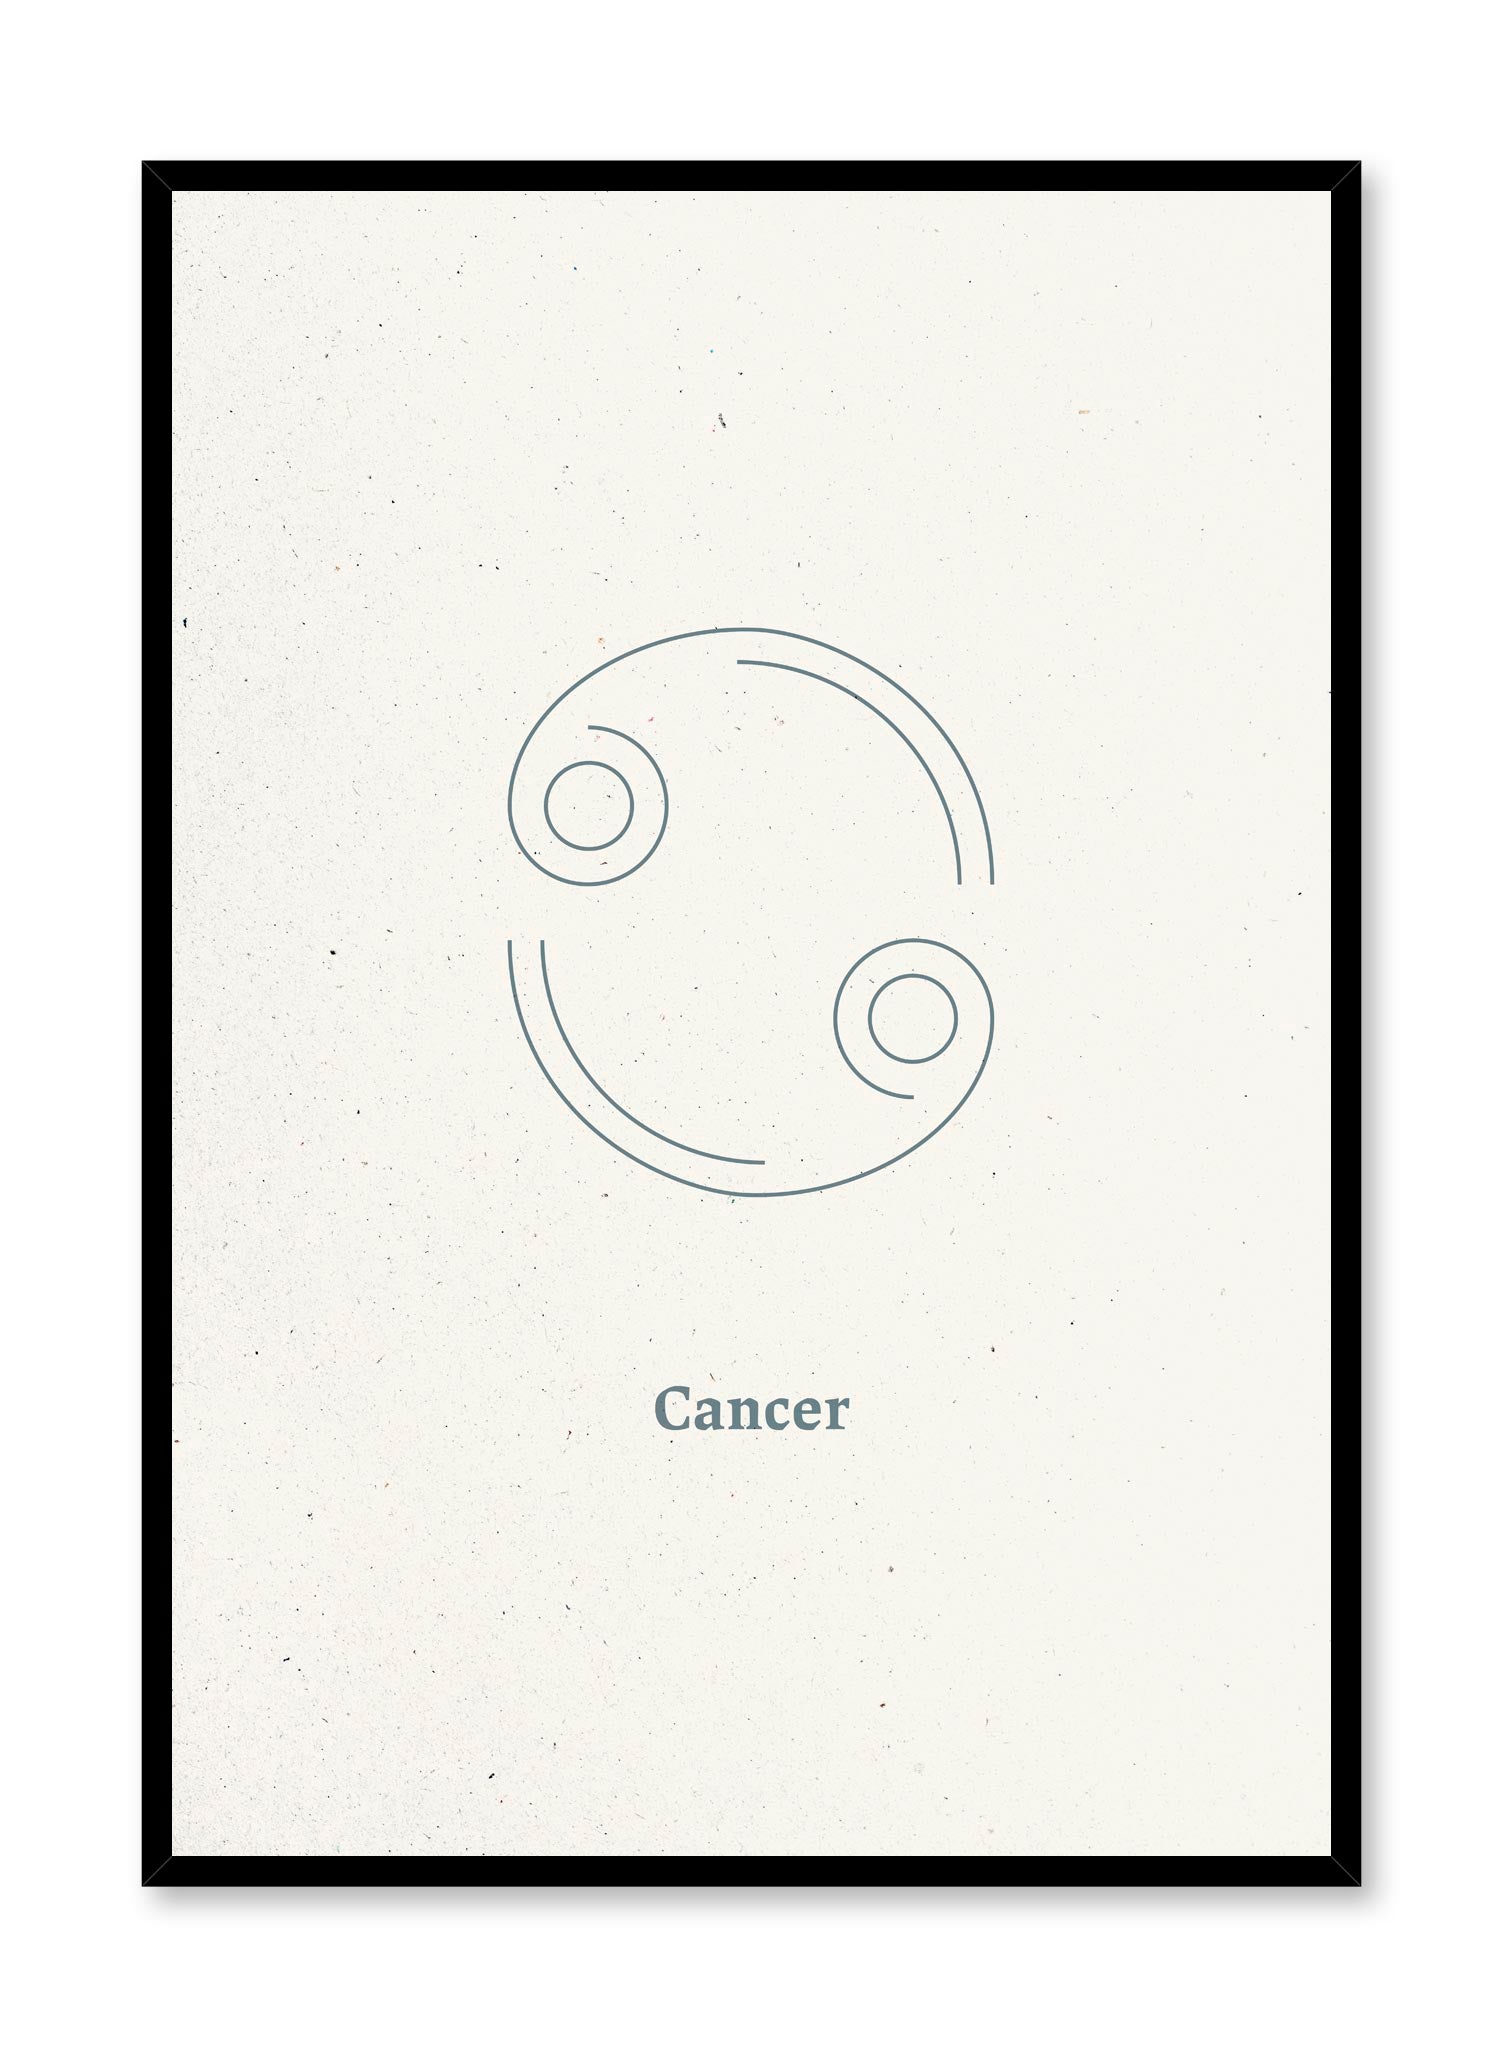 Minimalist celestial illustration poster by Opposite Wall with Cancer symbol